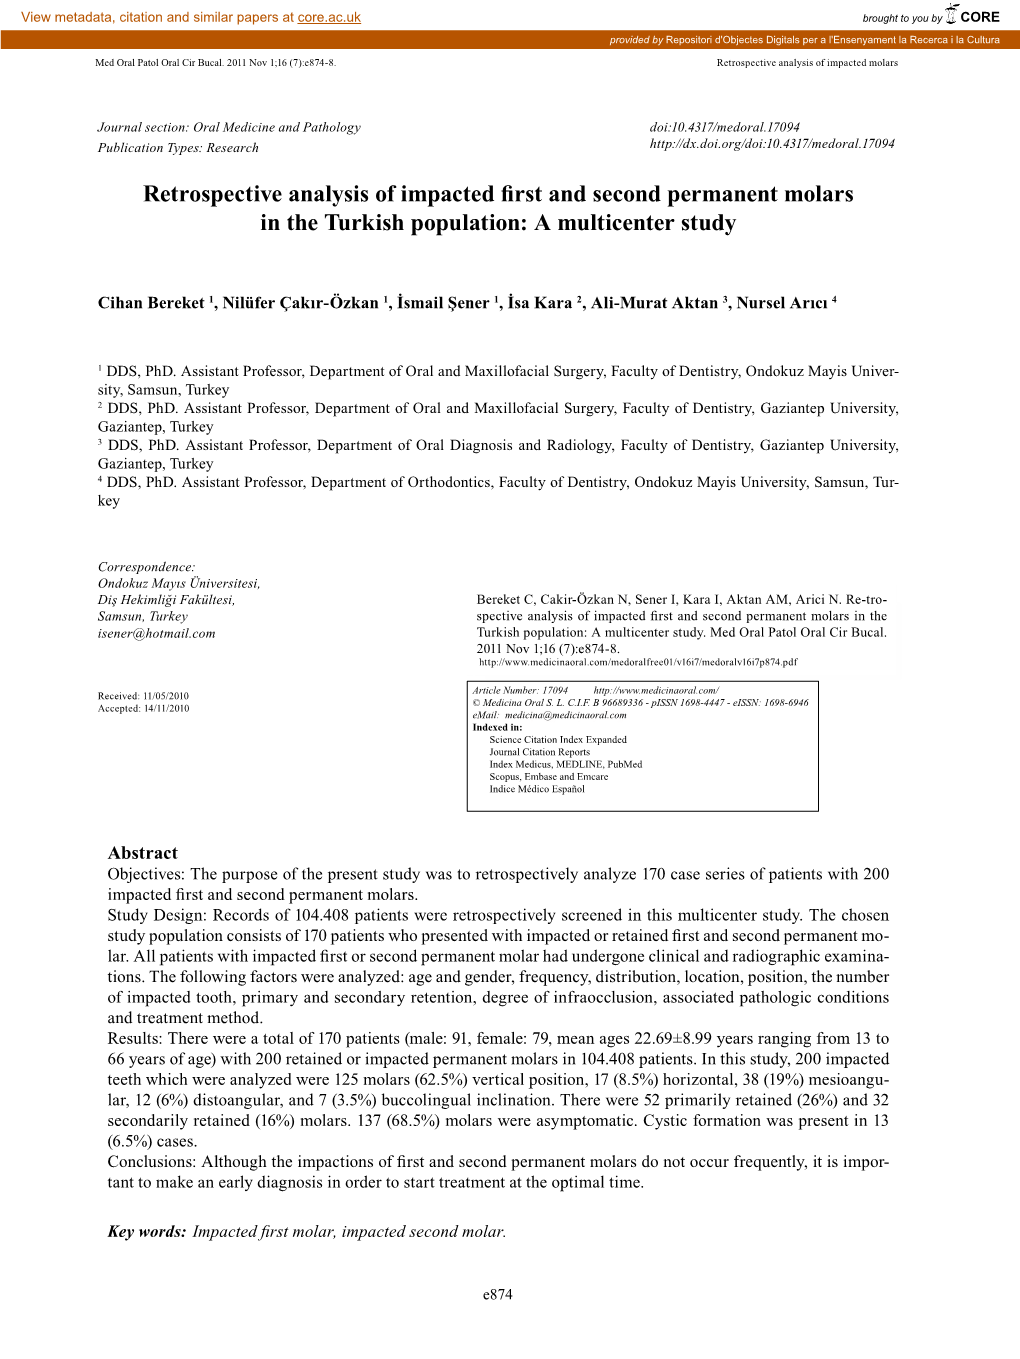 Retrospective Analysis of Impacted First and Second Permanent Molars in the Turkish Population: a Multicenter Study